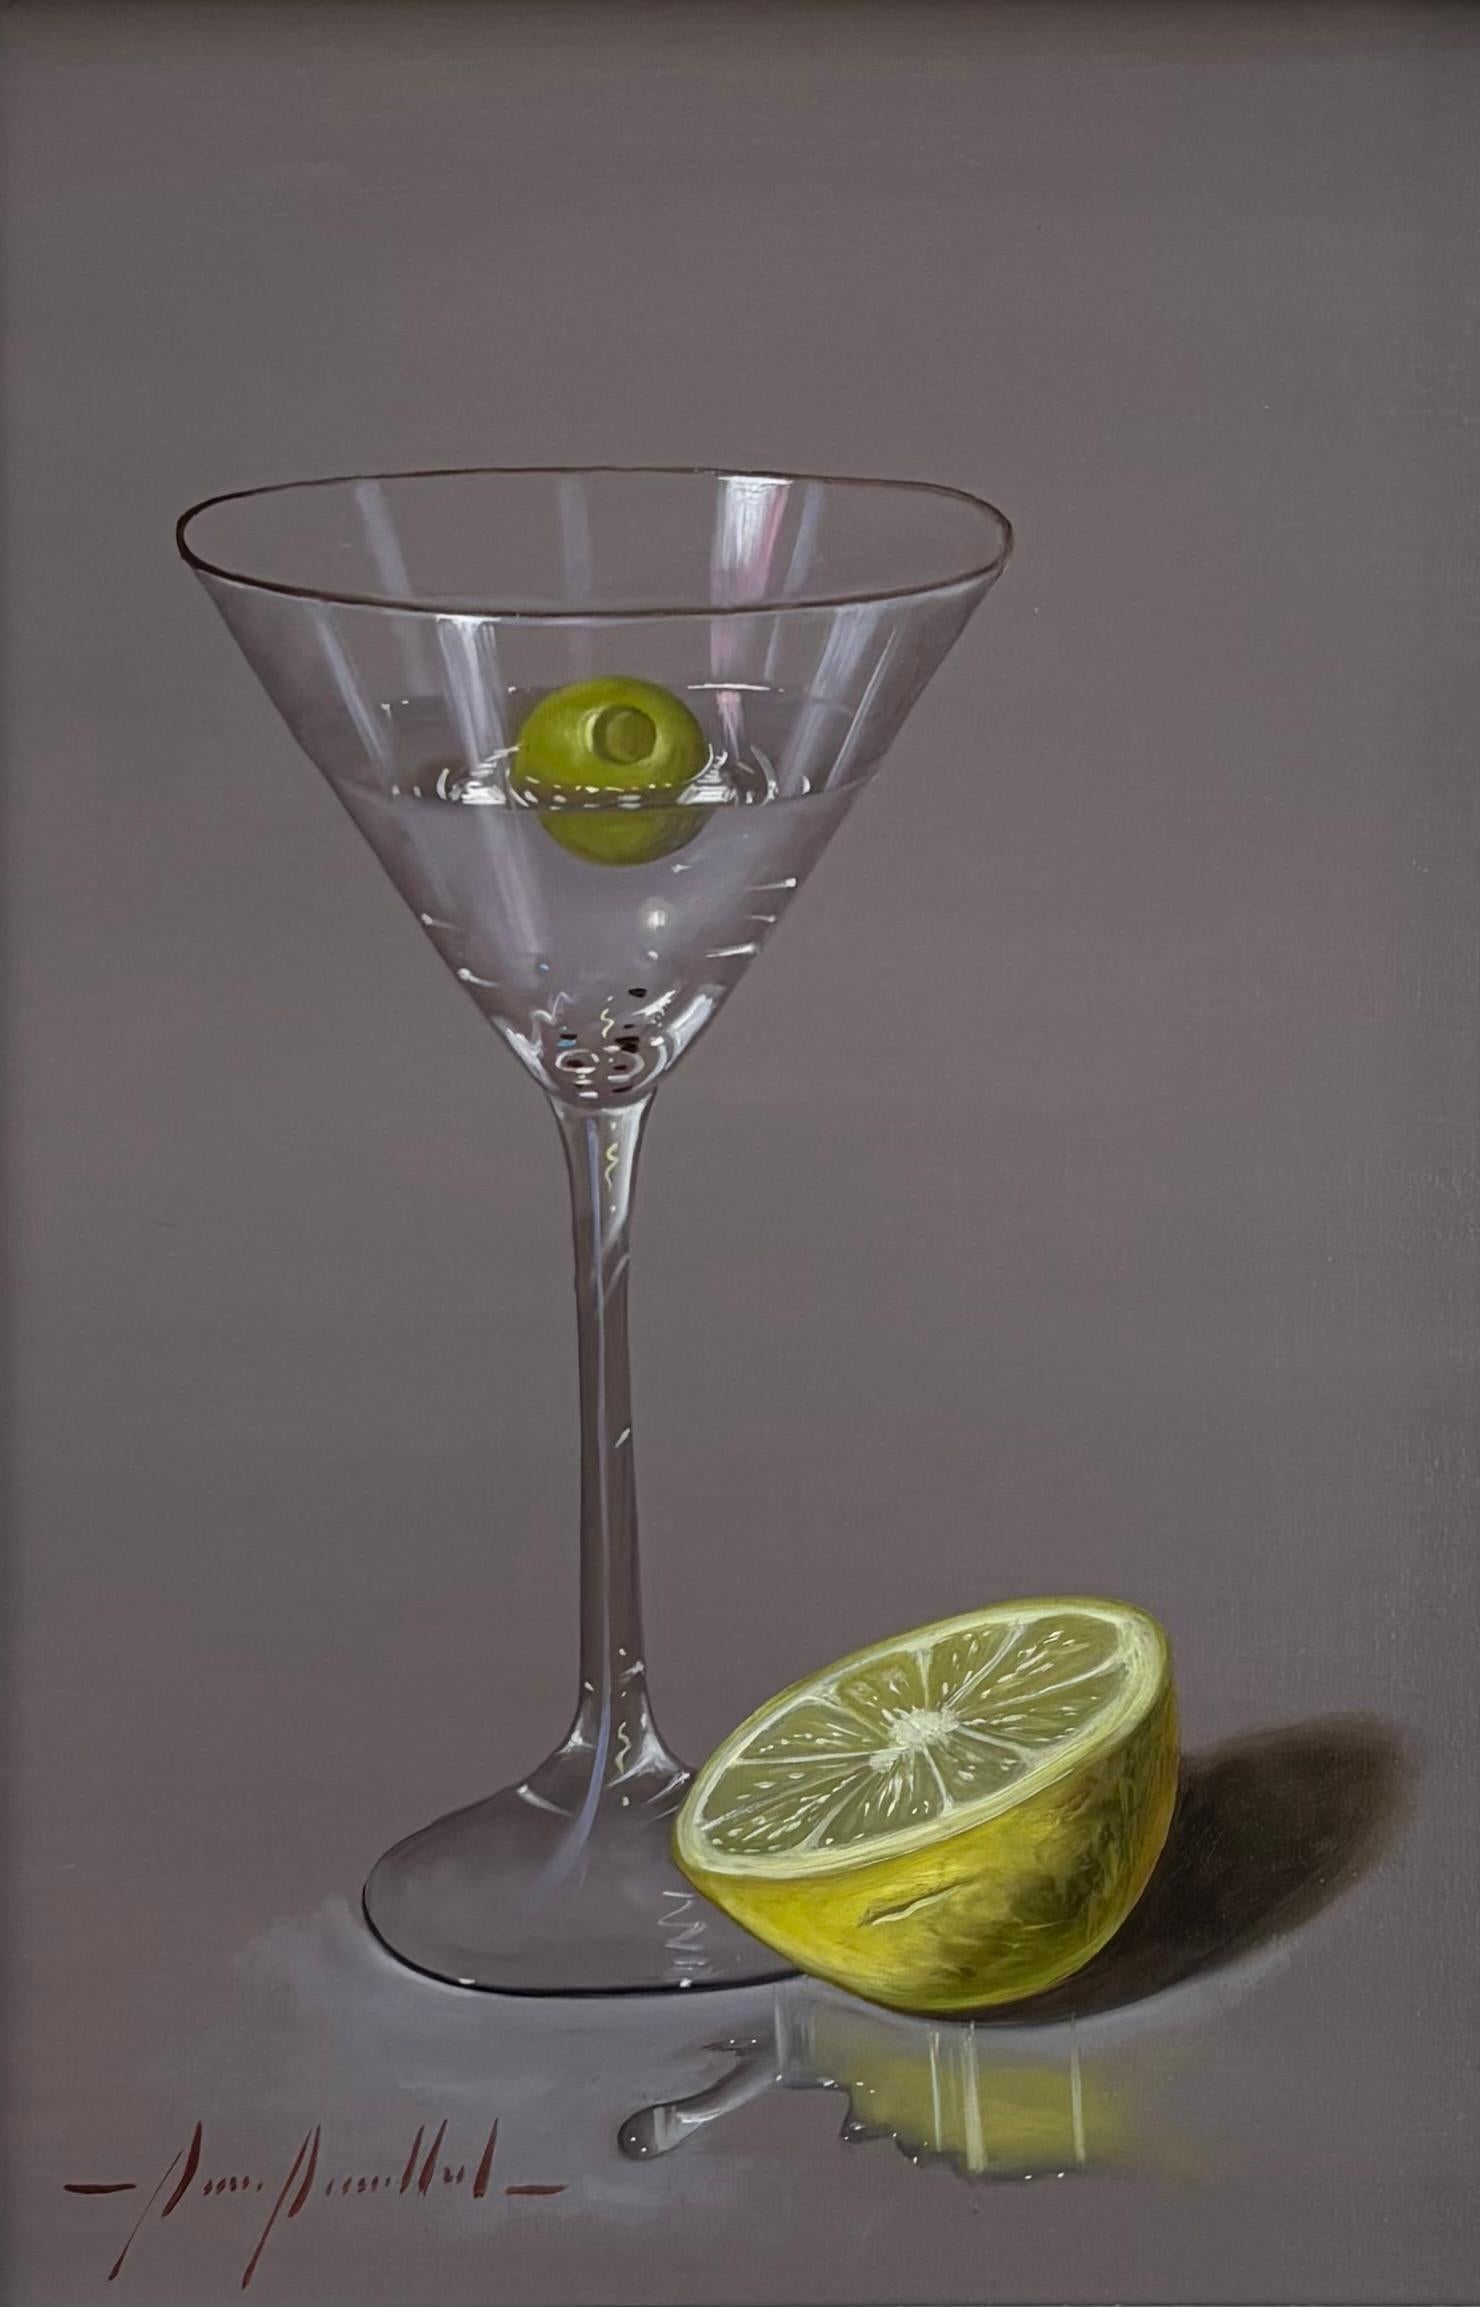 Martini of the Day - Still Life - Martini glass with olive & lime - Realist o/c